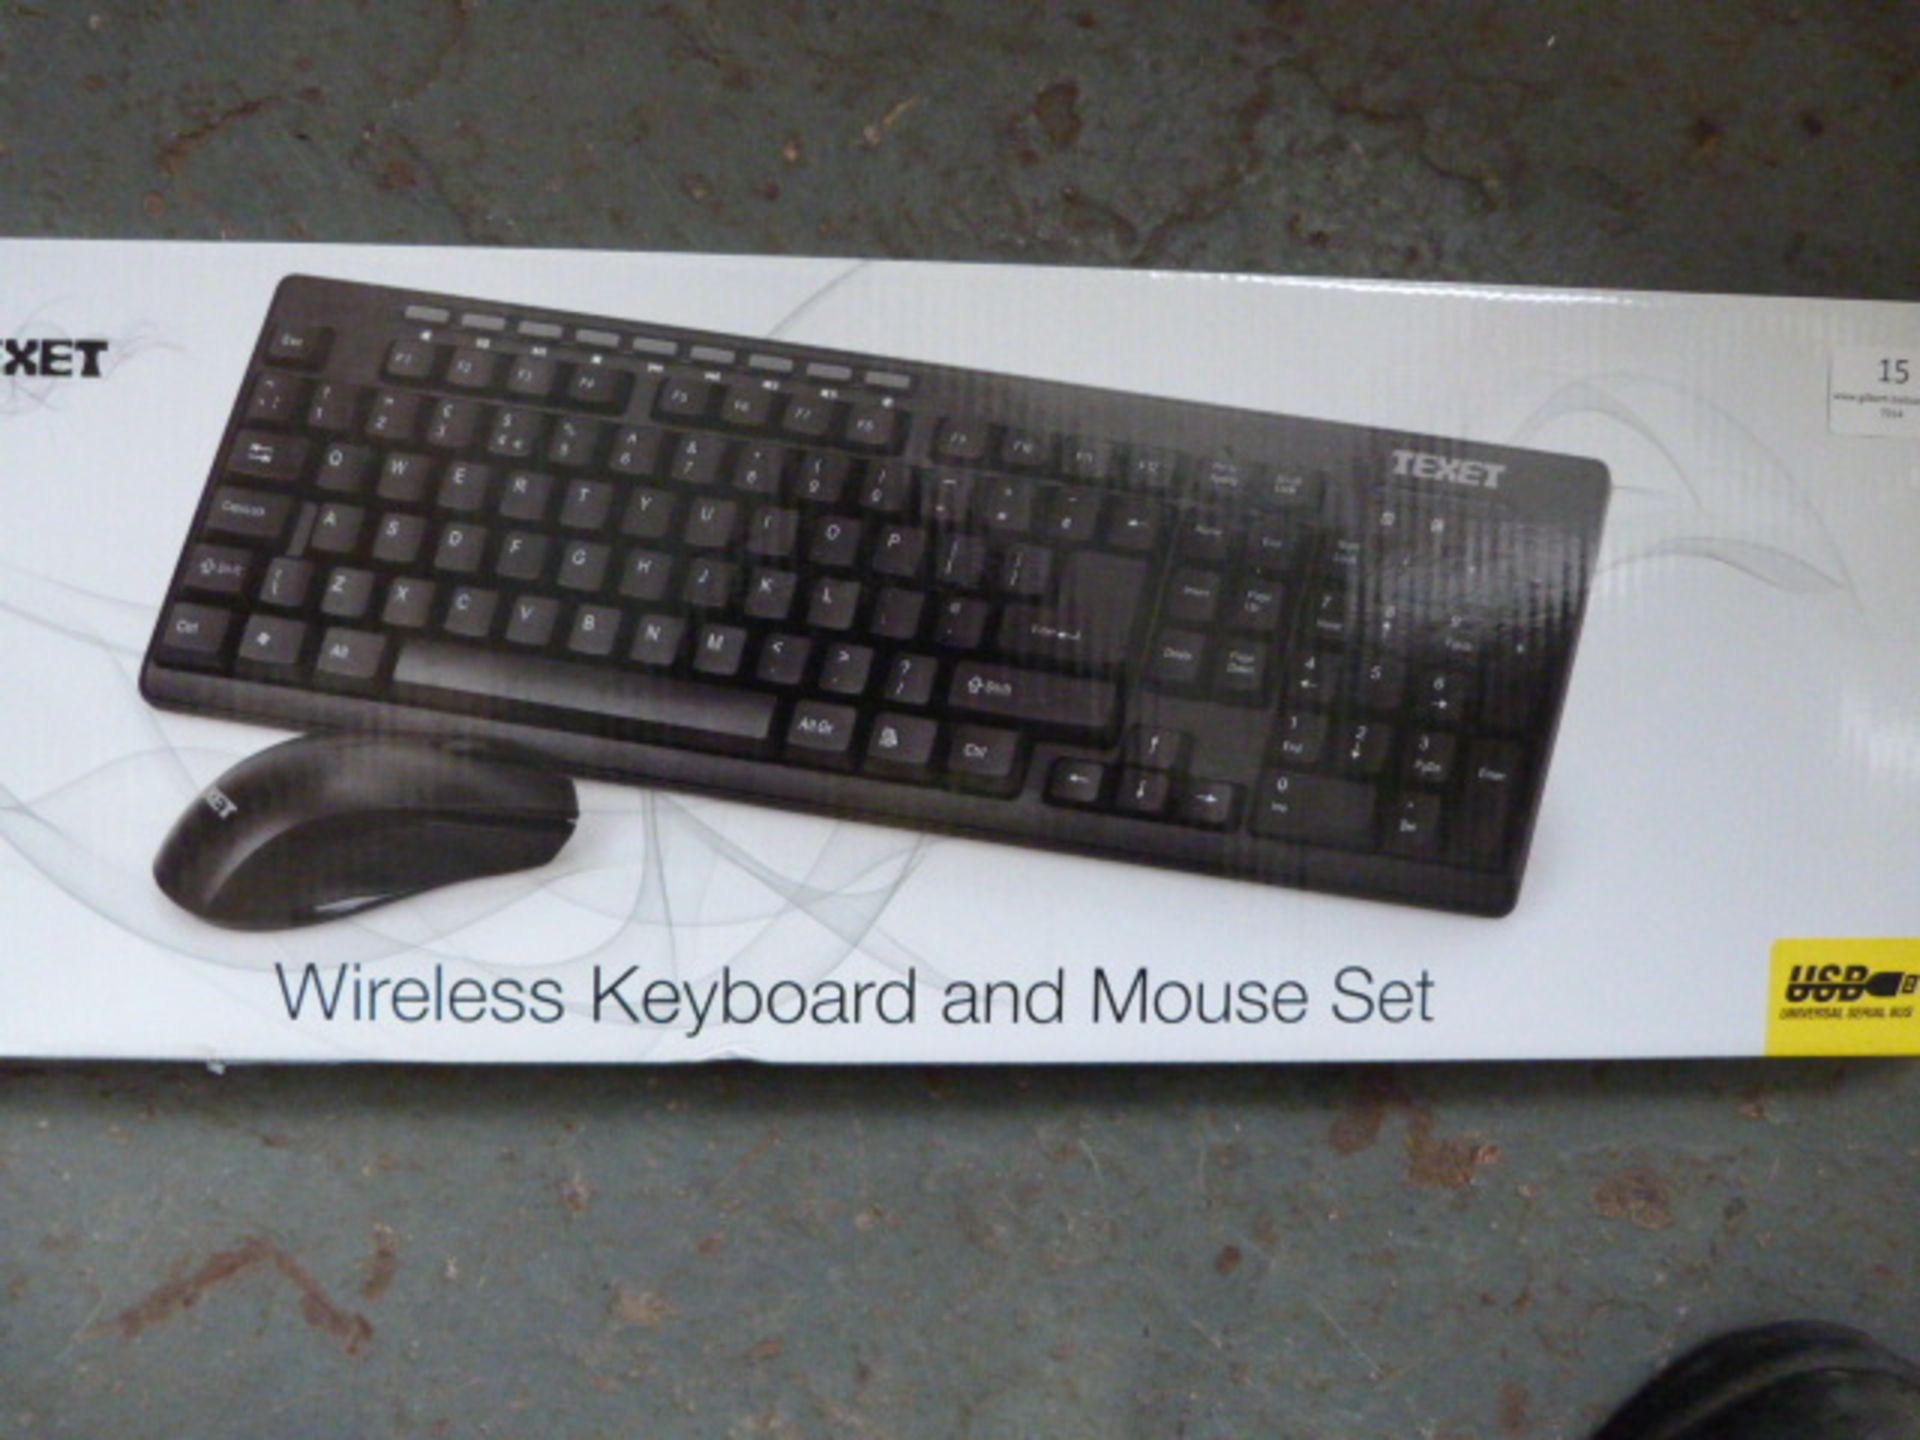 *Texet Wire Keyboard and Mouse